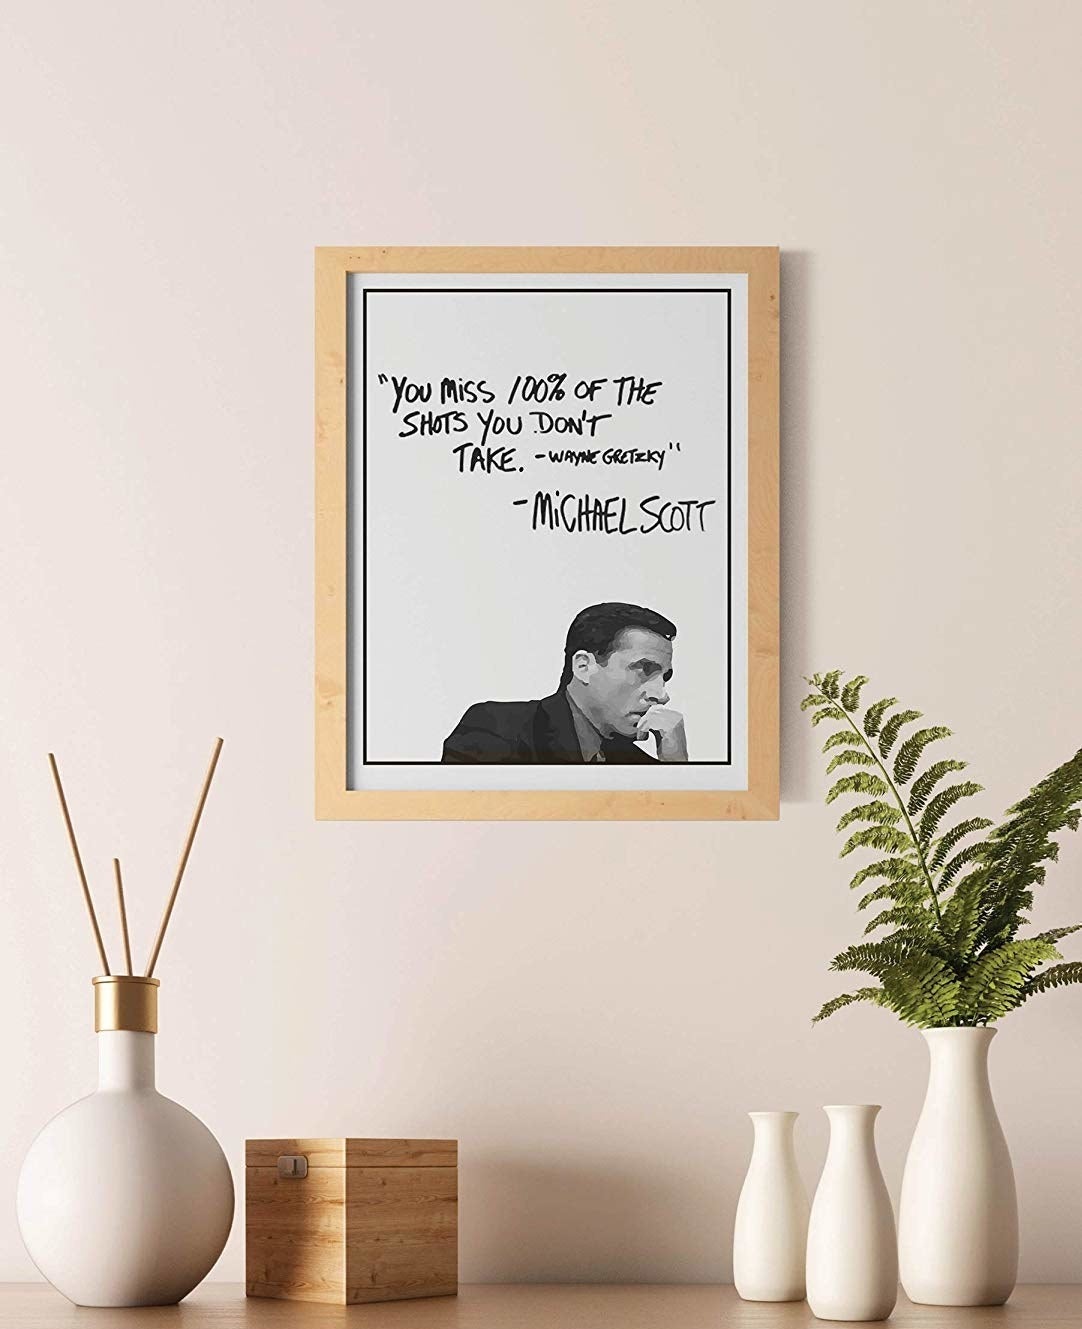 Michael Scott print with a quote from &quot;The Office&quot;